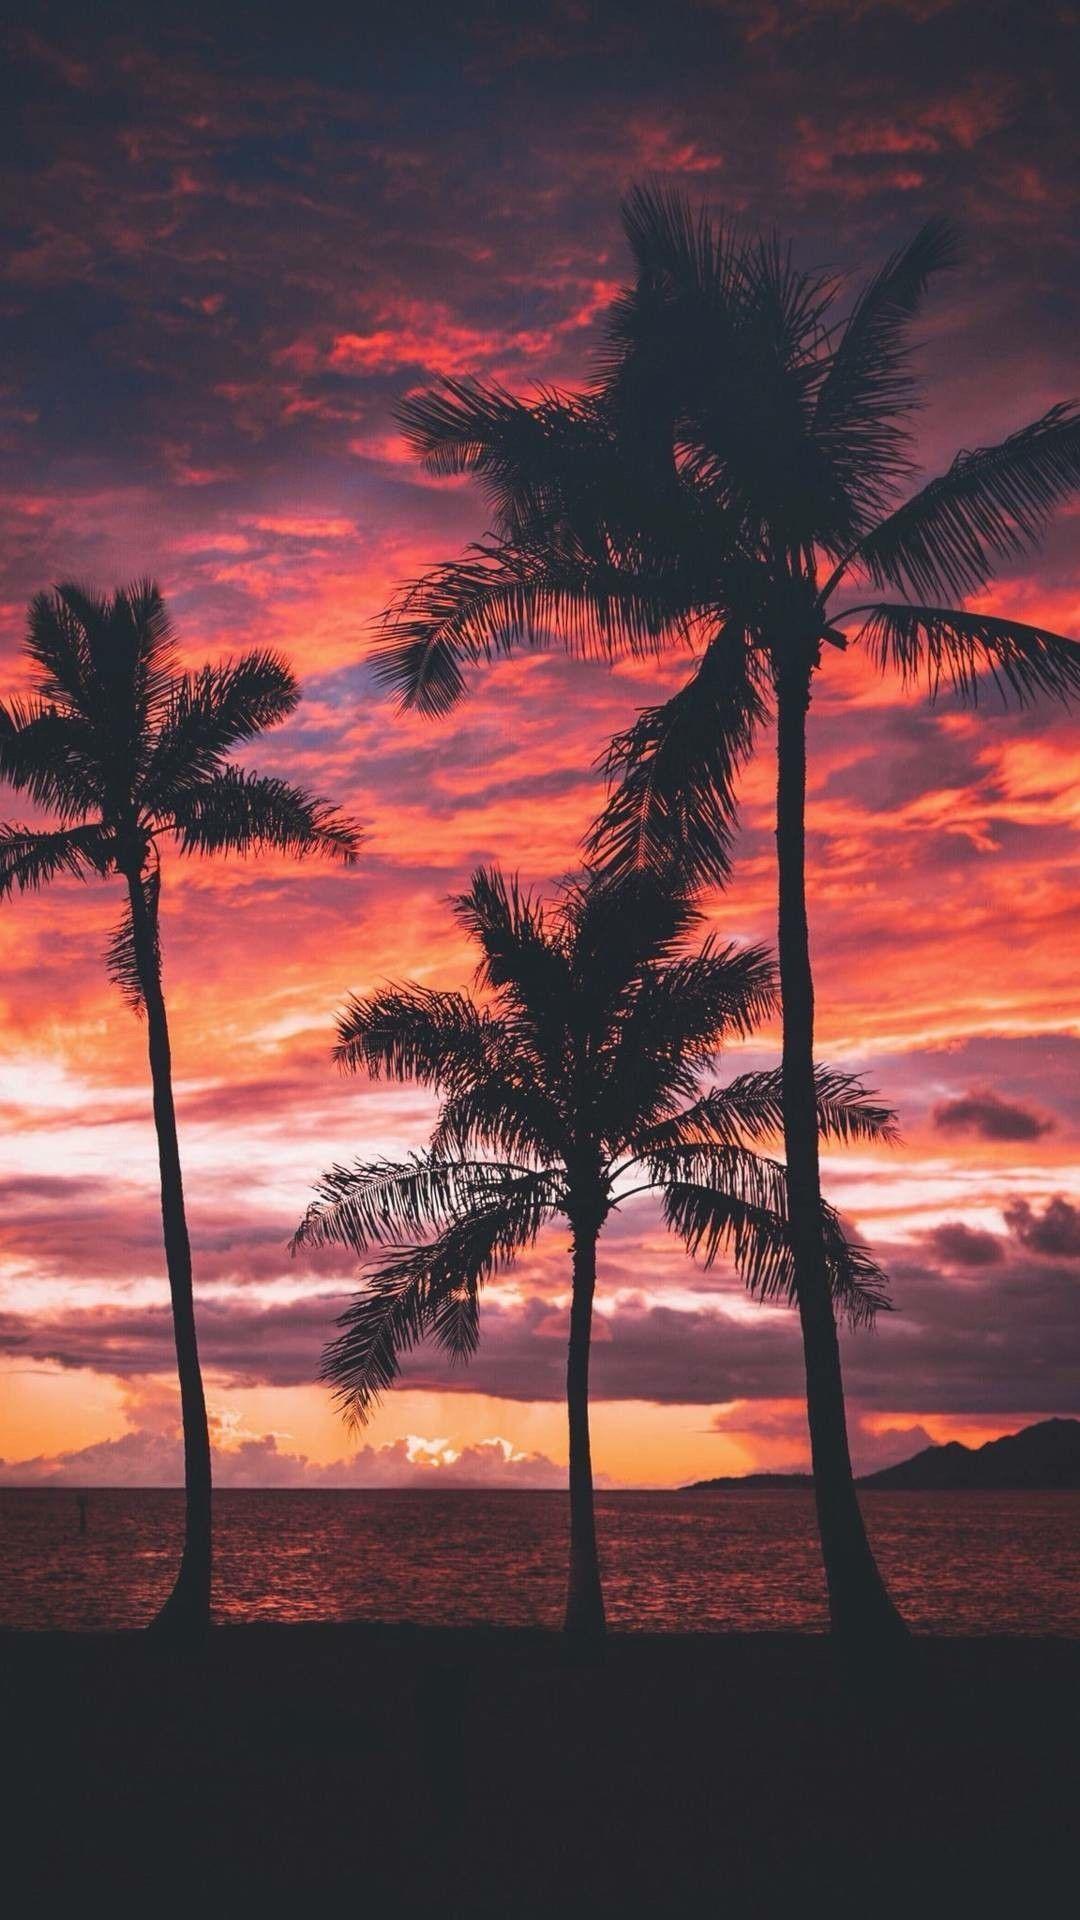 Palm Tree Sunset Wallpapers - Top Free Palm Tree Sunset Backgrounds